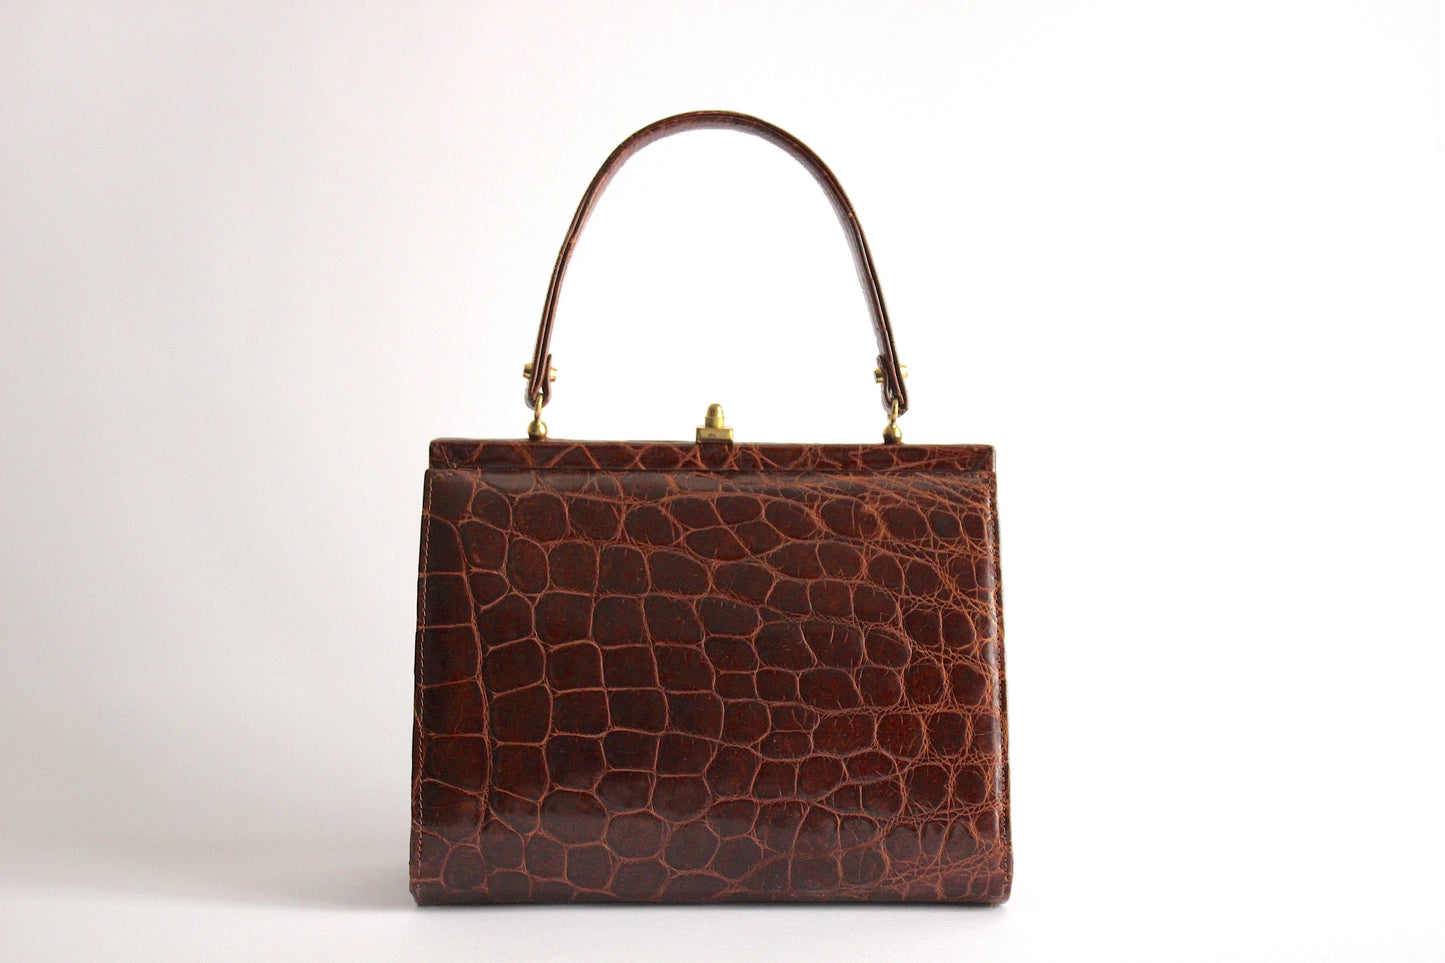 Vintage Elegance Rescued: 1960s Brown Glossy Leather Handbag from Vienna